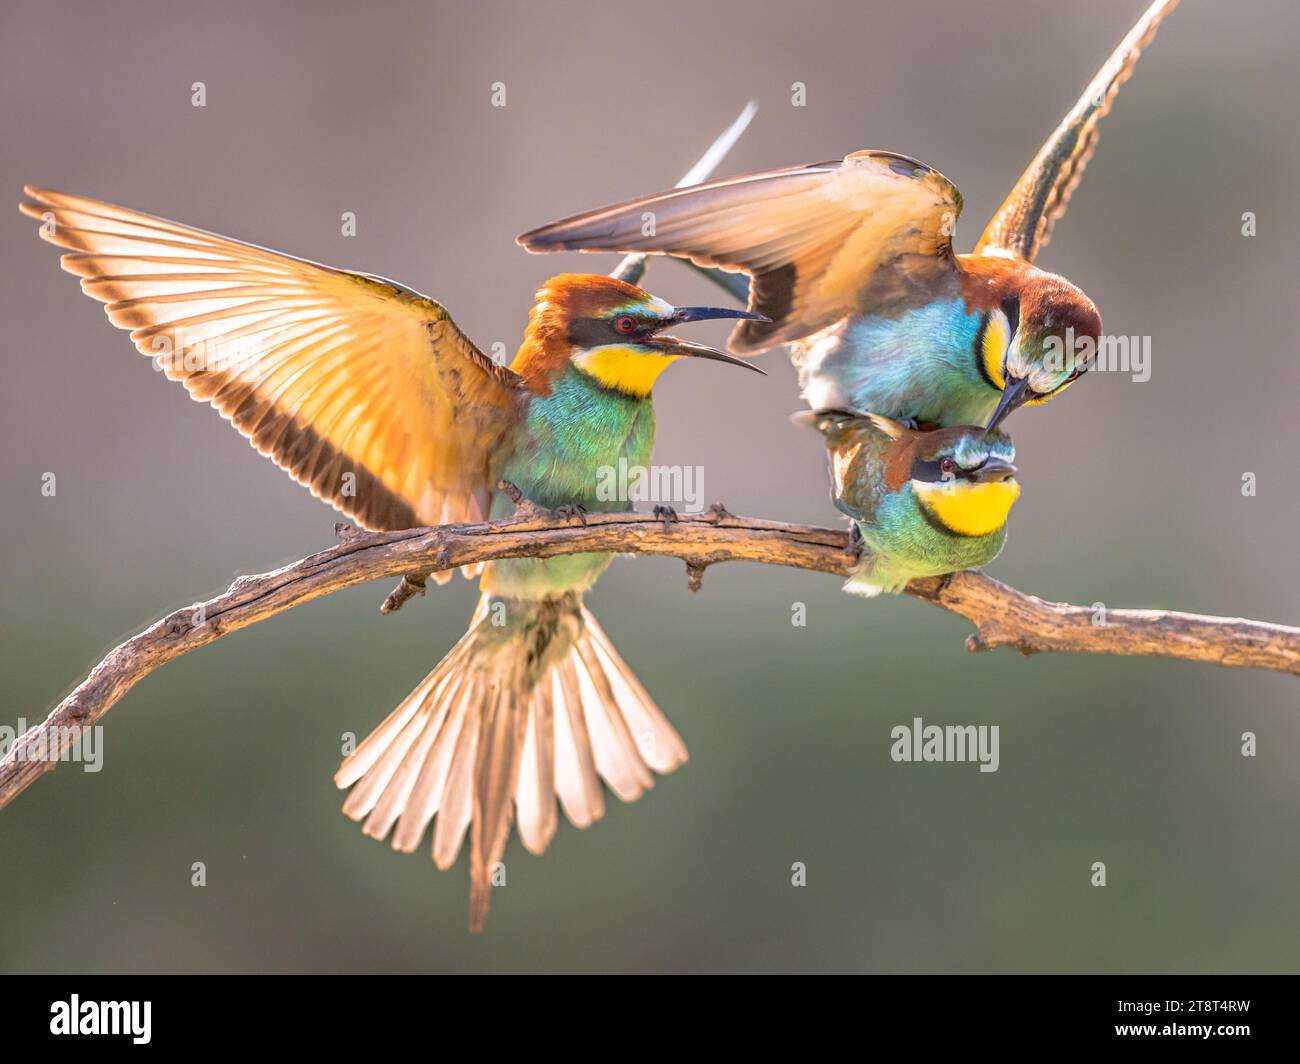 European Bee-Eater (Merops apiaster) fighting in flight over territory on blurred background near Breeding Colony. Wildlife scene of Nature in Europe. Stock Photo